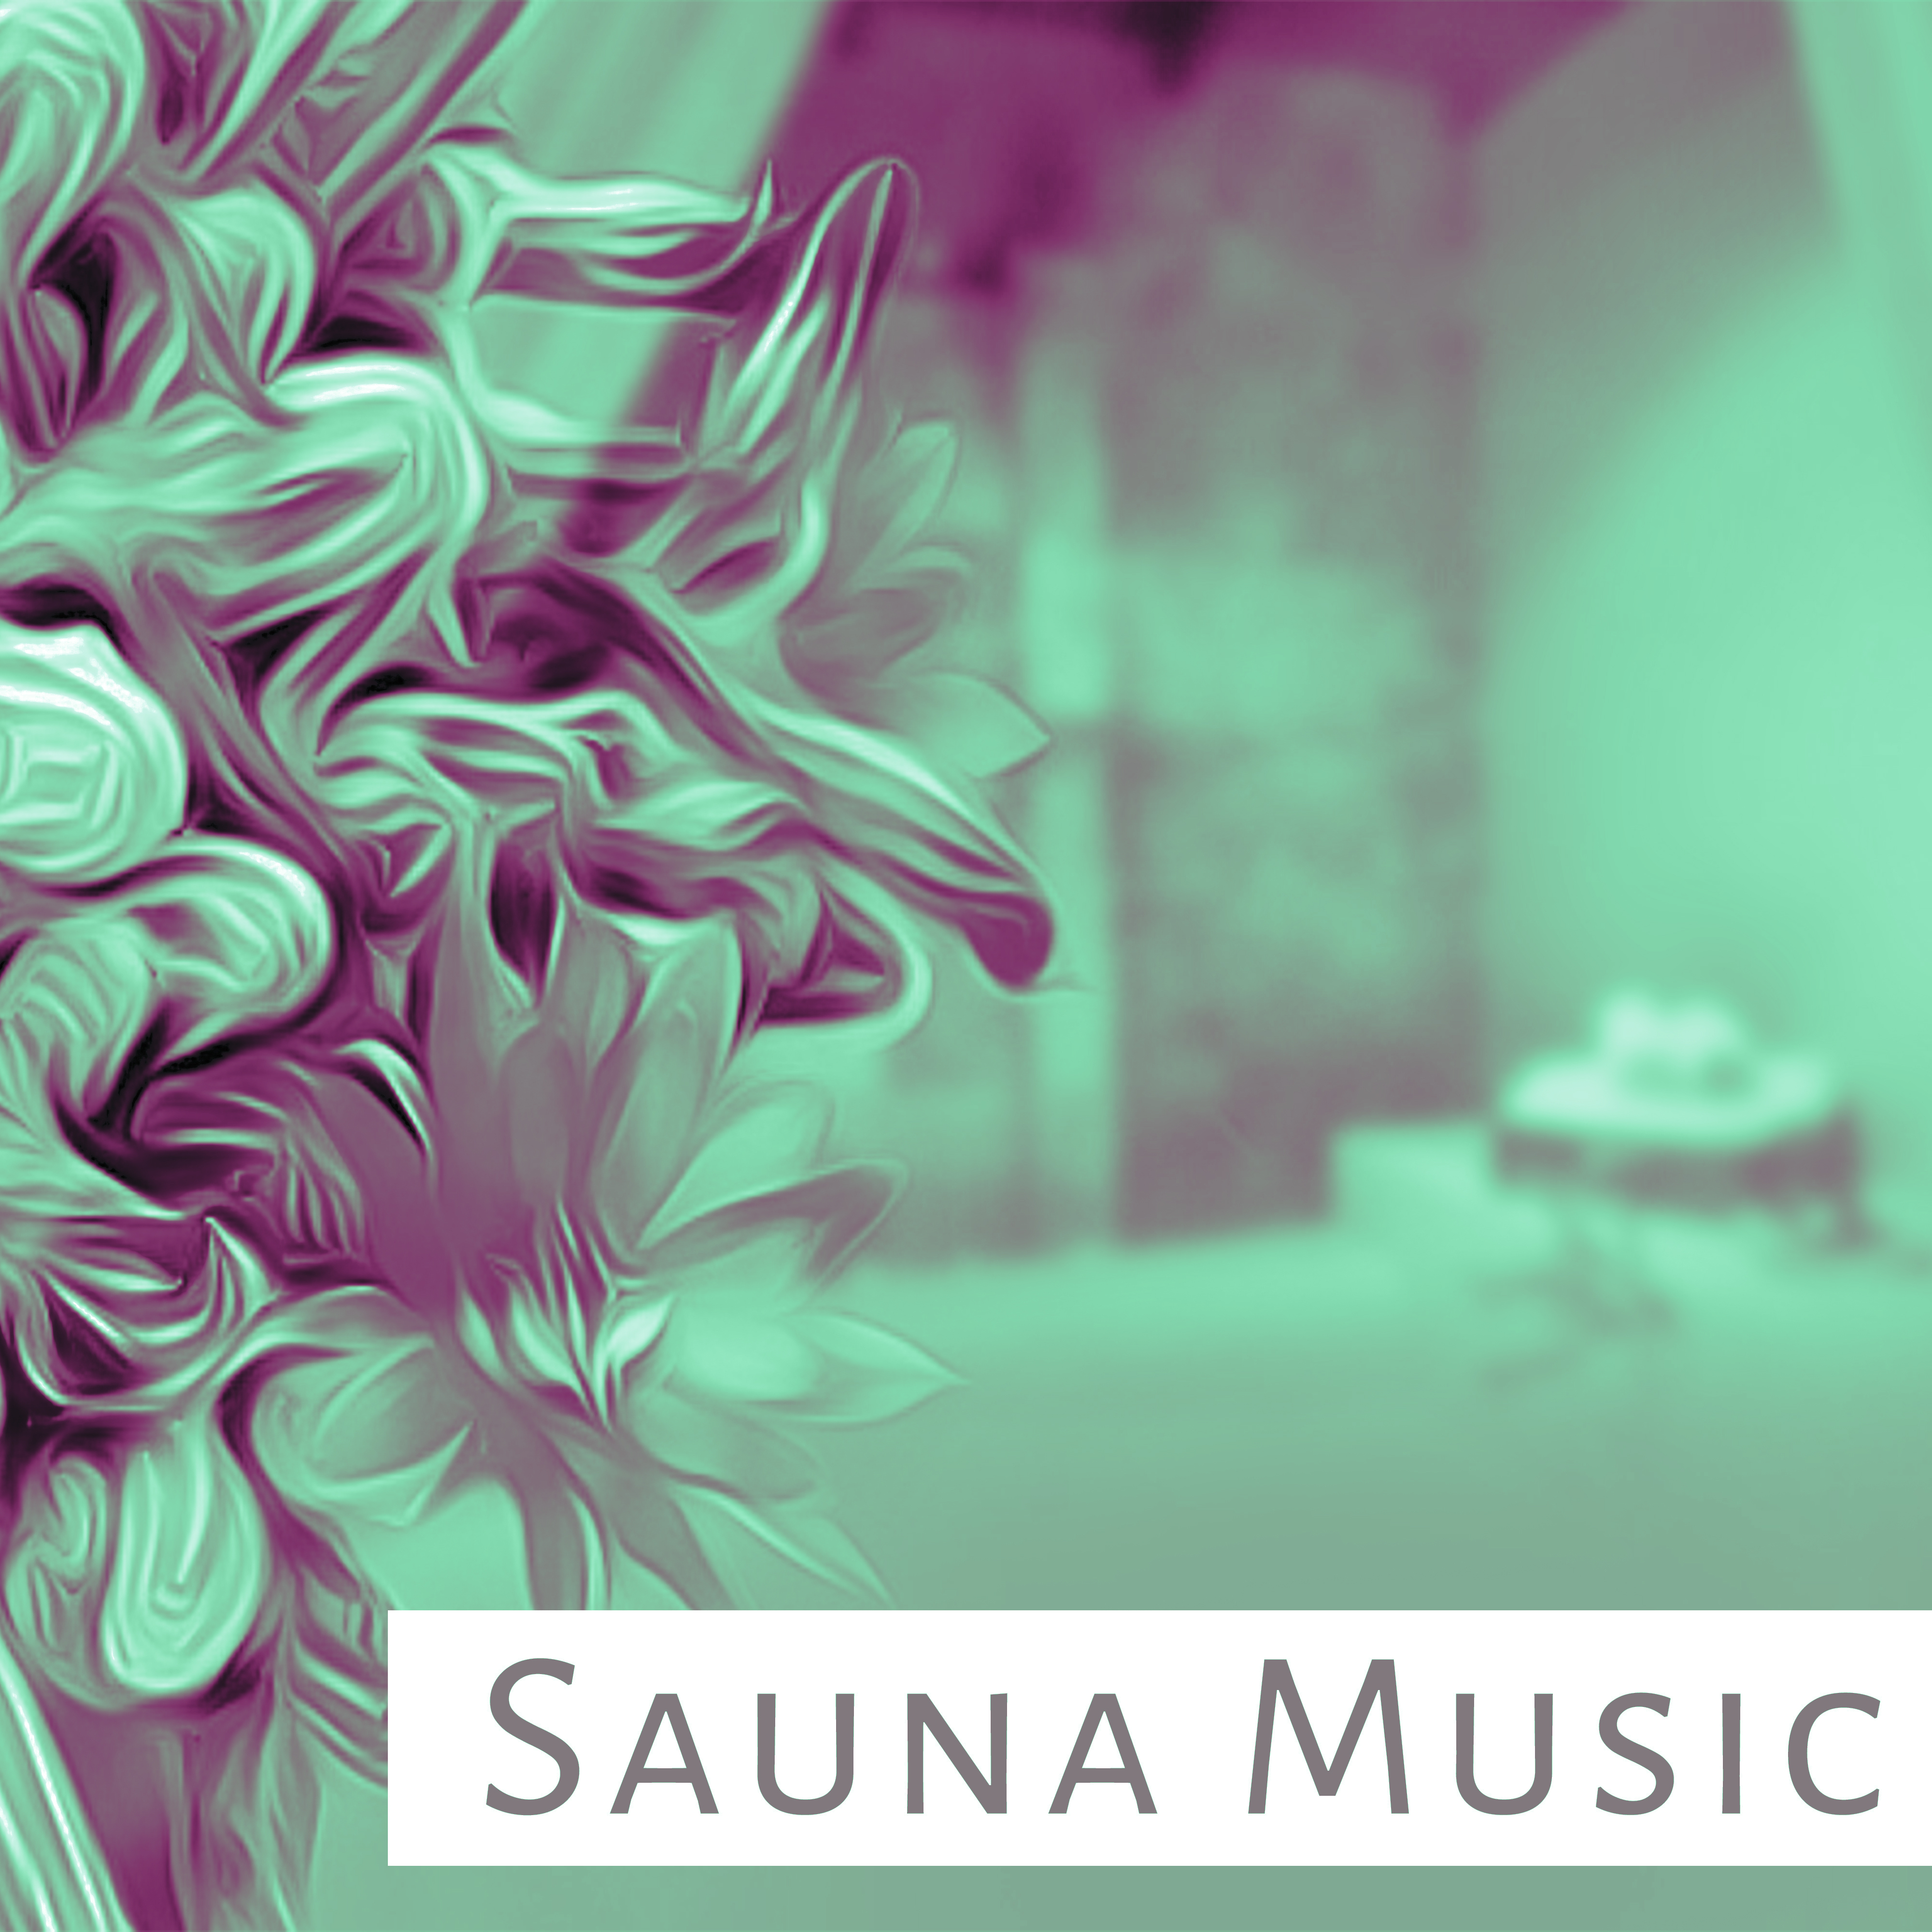 Sauna Music  Calming Sounds of Nature, Best Background Music for Sauna, Spa, Massage Treatments